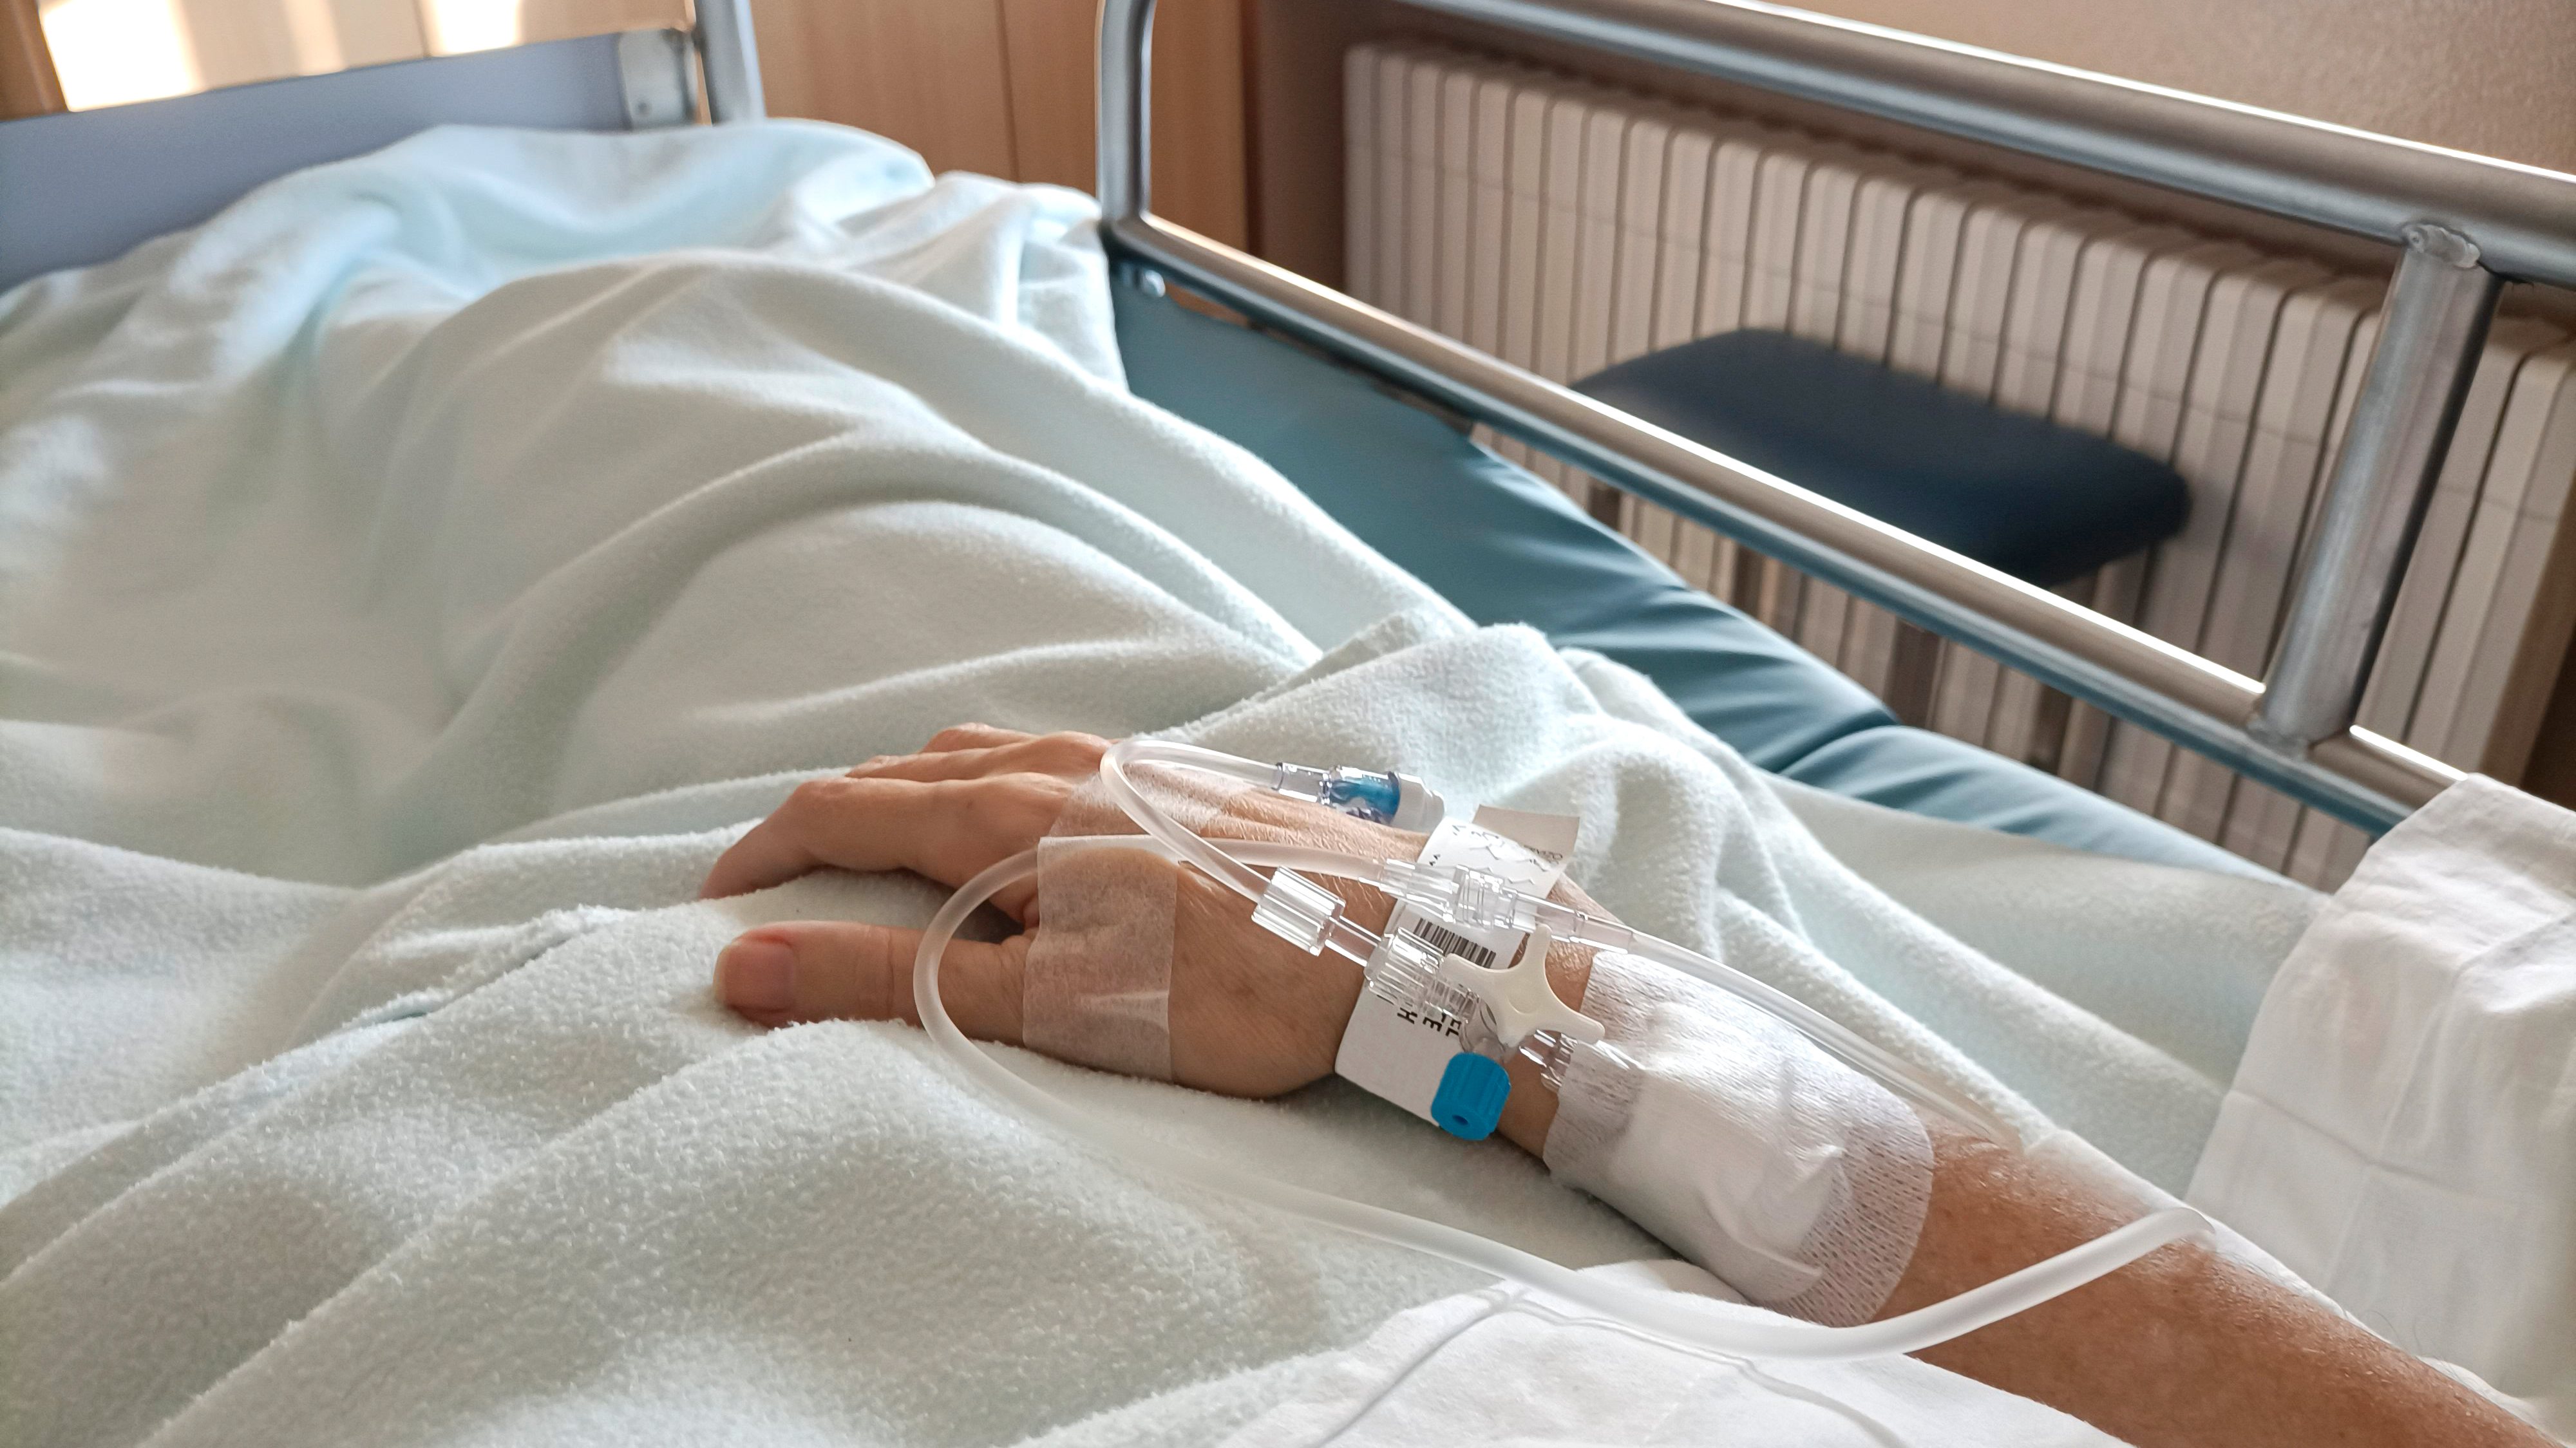 Midsection Of Patient With Iv Drip Relaxing On Hospital Bed